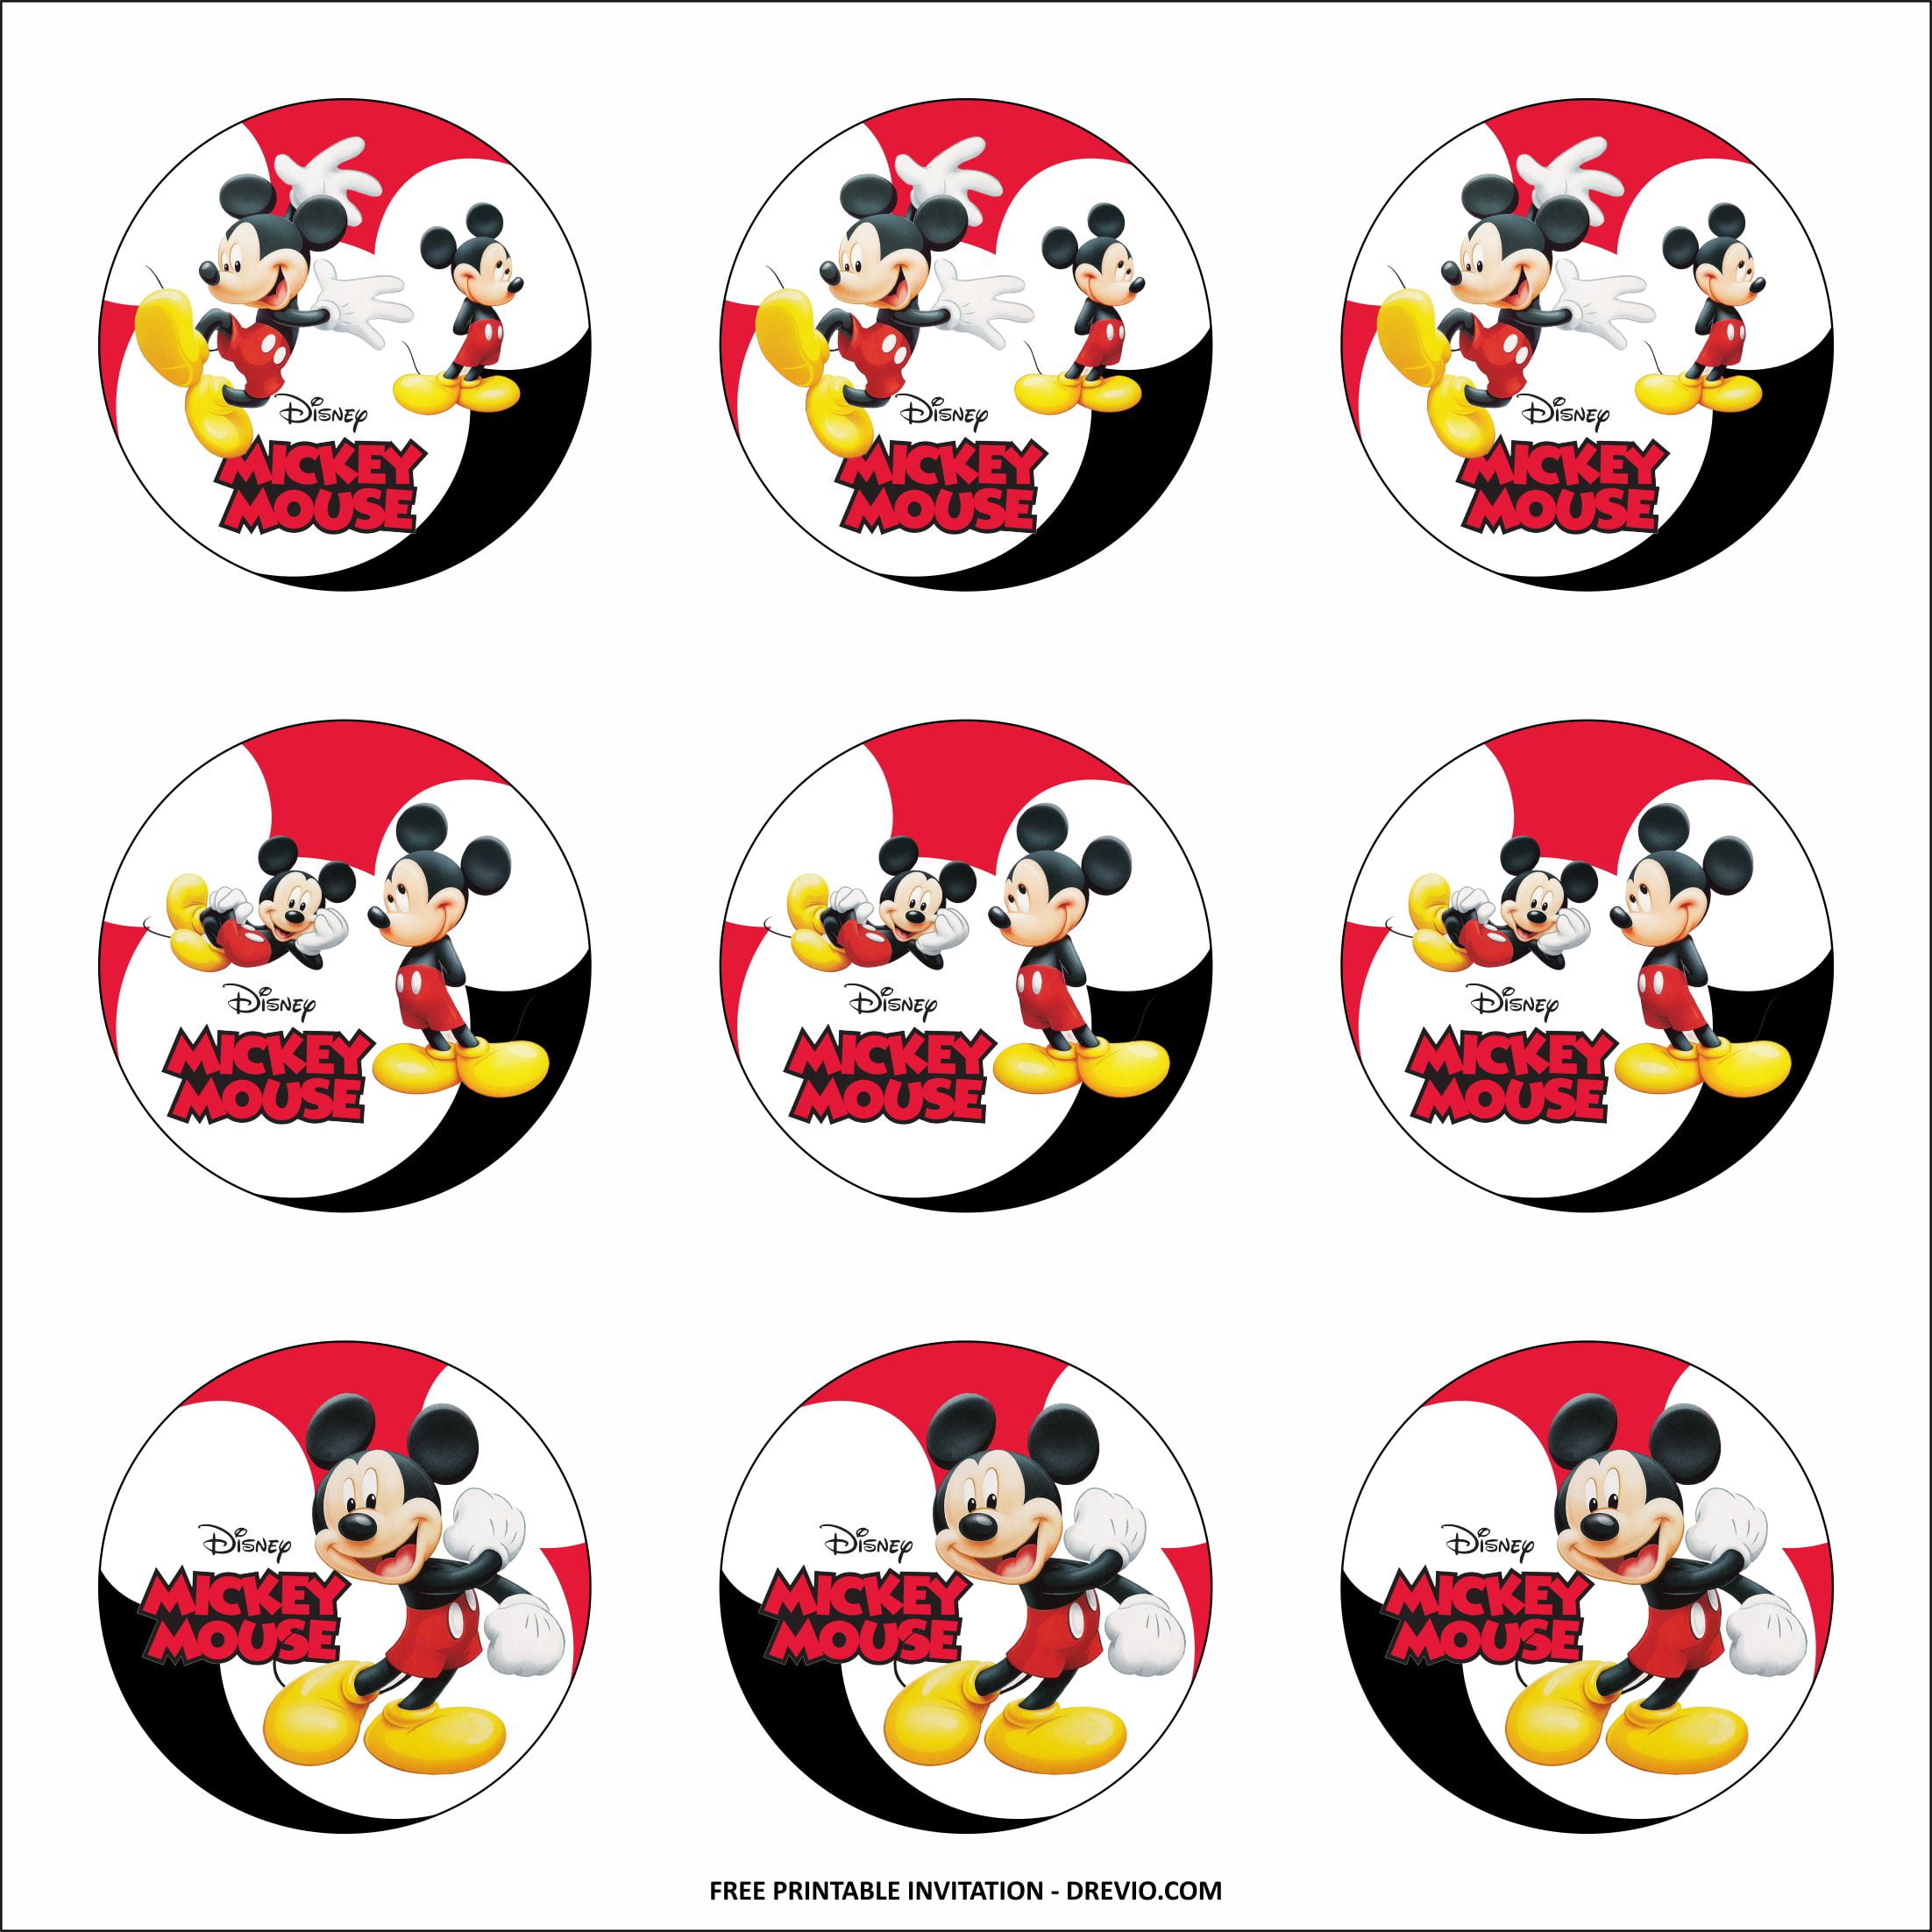 free-printable-mickey-mouse-birthday-party-kits-template-download-hundreds-free-printable